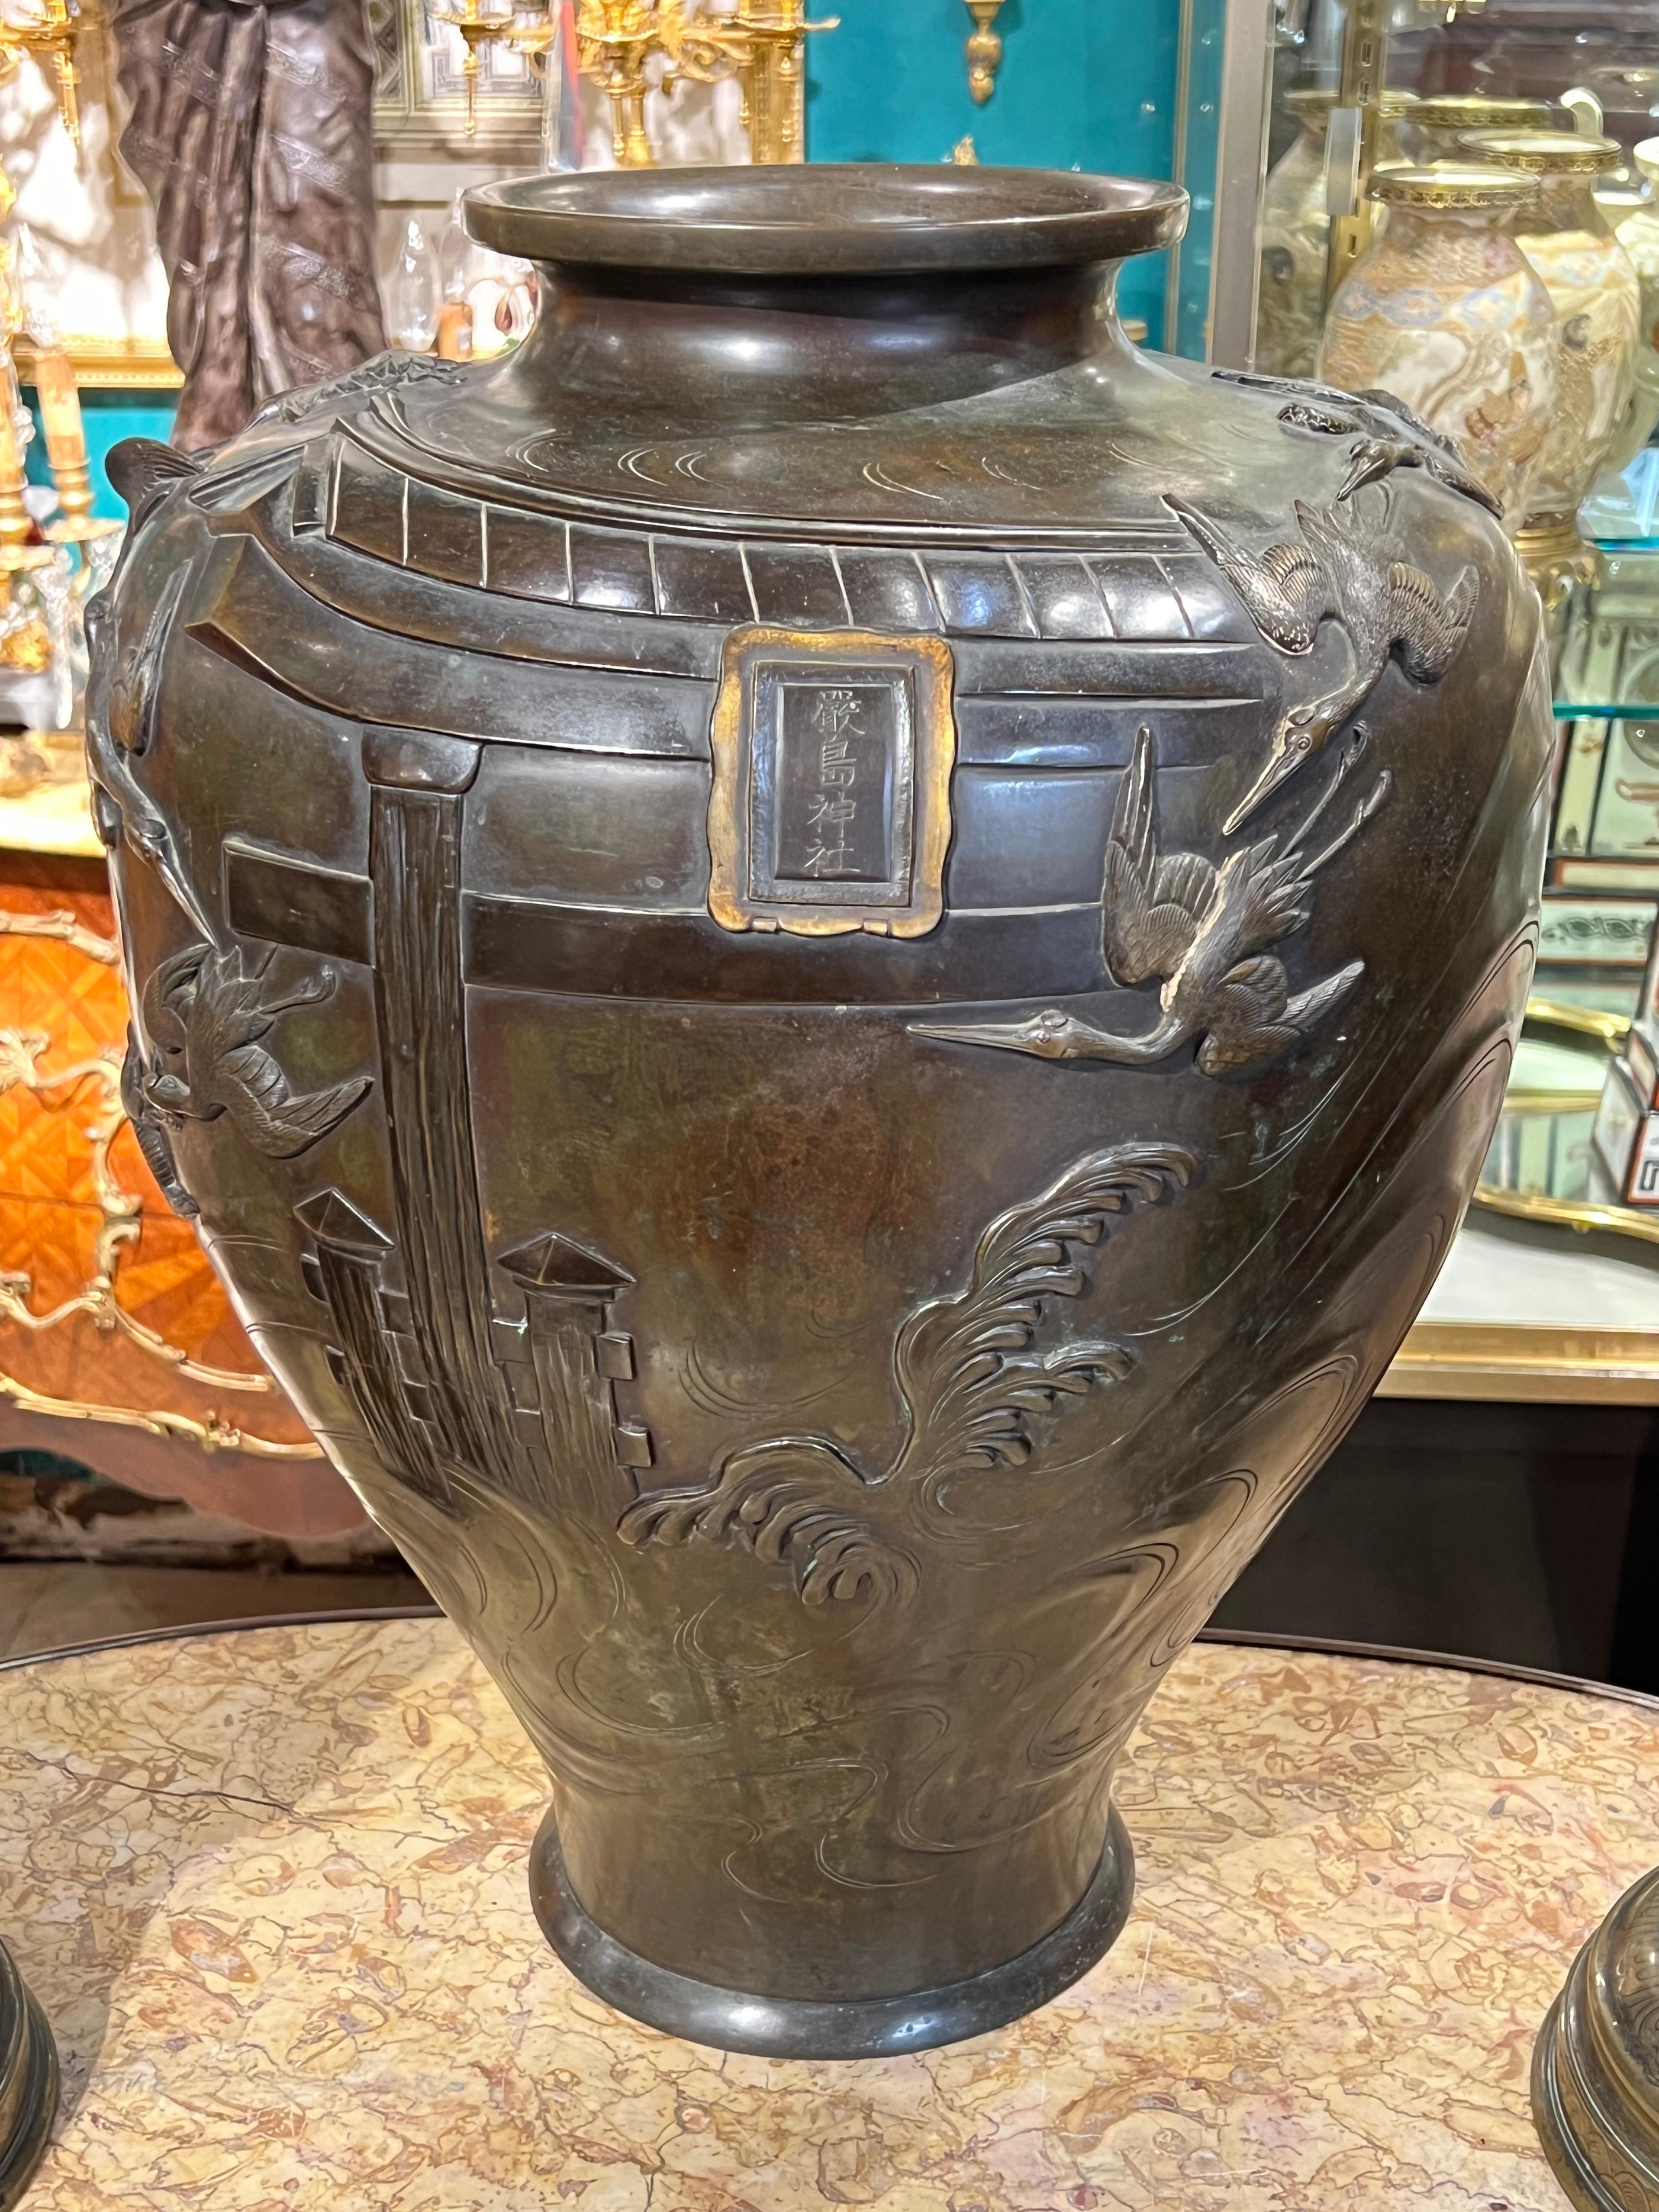 Large antique (19th century) Japanese patinated bronze centerpiece vase with  fine reliefs depicting cranes in flight above the sea with waves and temple gate representing the Itsukushima Shrine.  Signed 嚴島神社  for Itsukushima Shrine.
